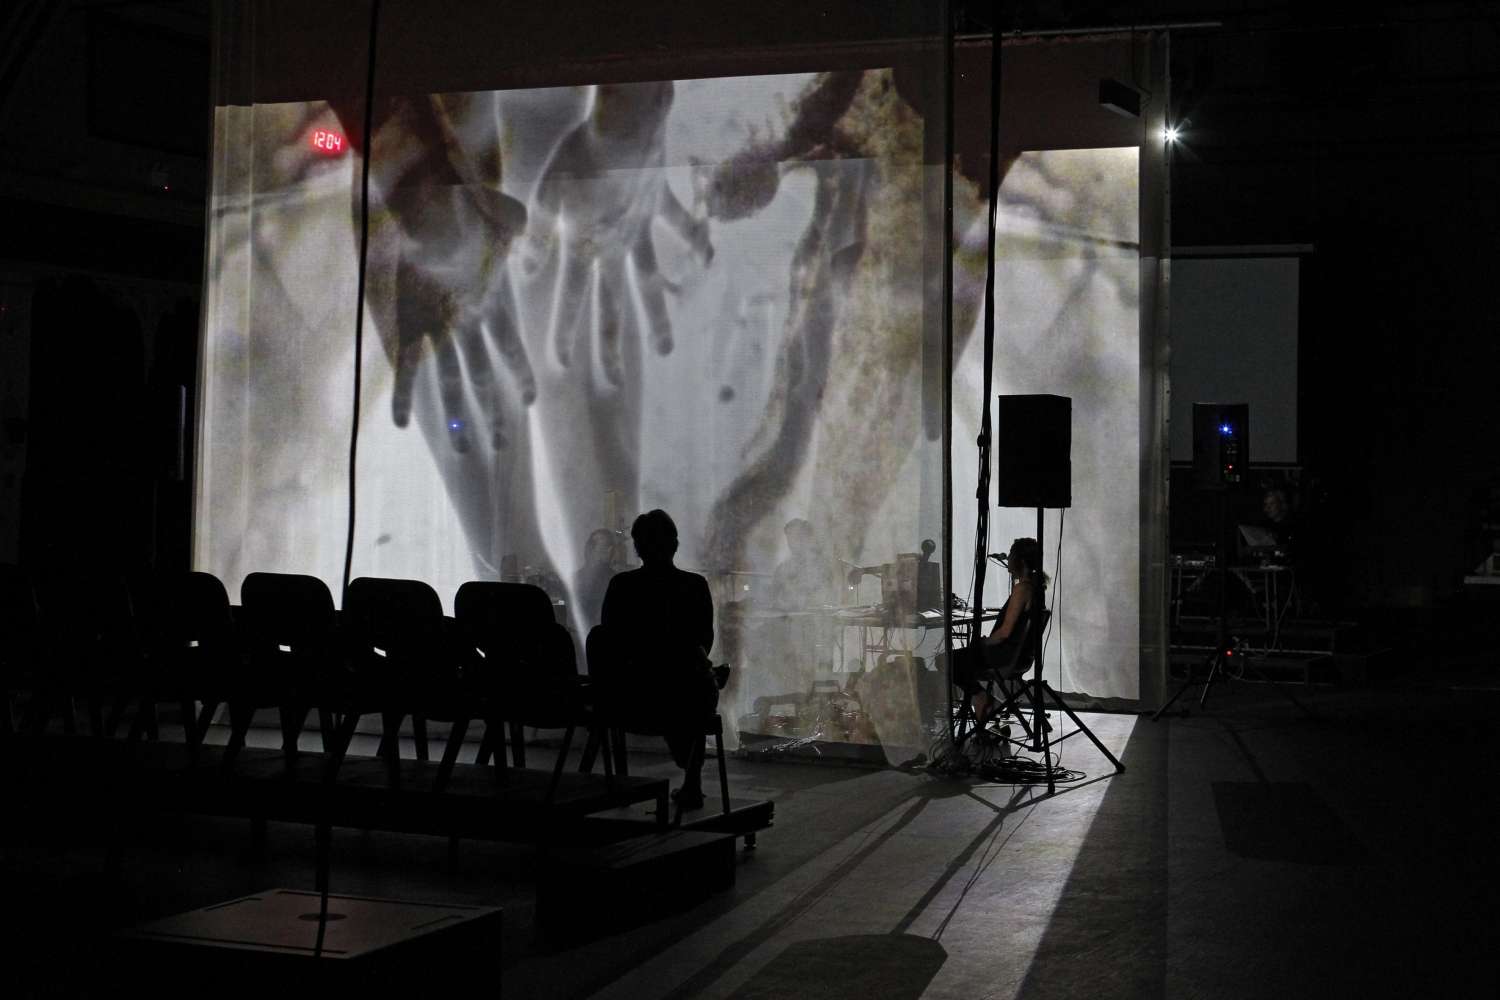 Shot of empty seating bank and two performers seated with large screens on which images of hands are projected